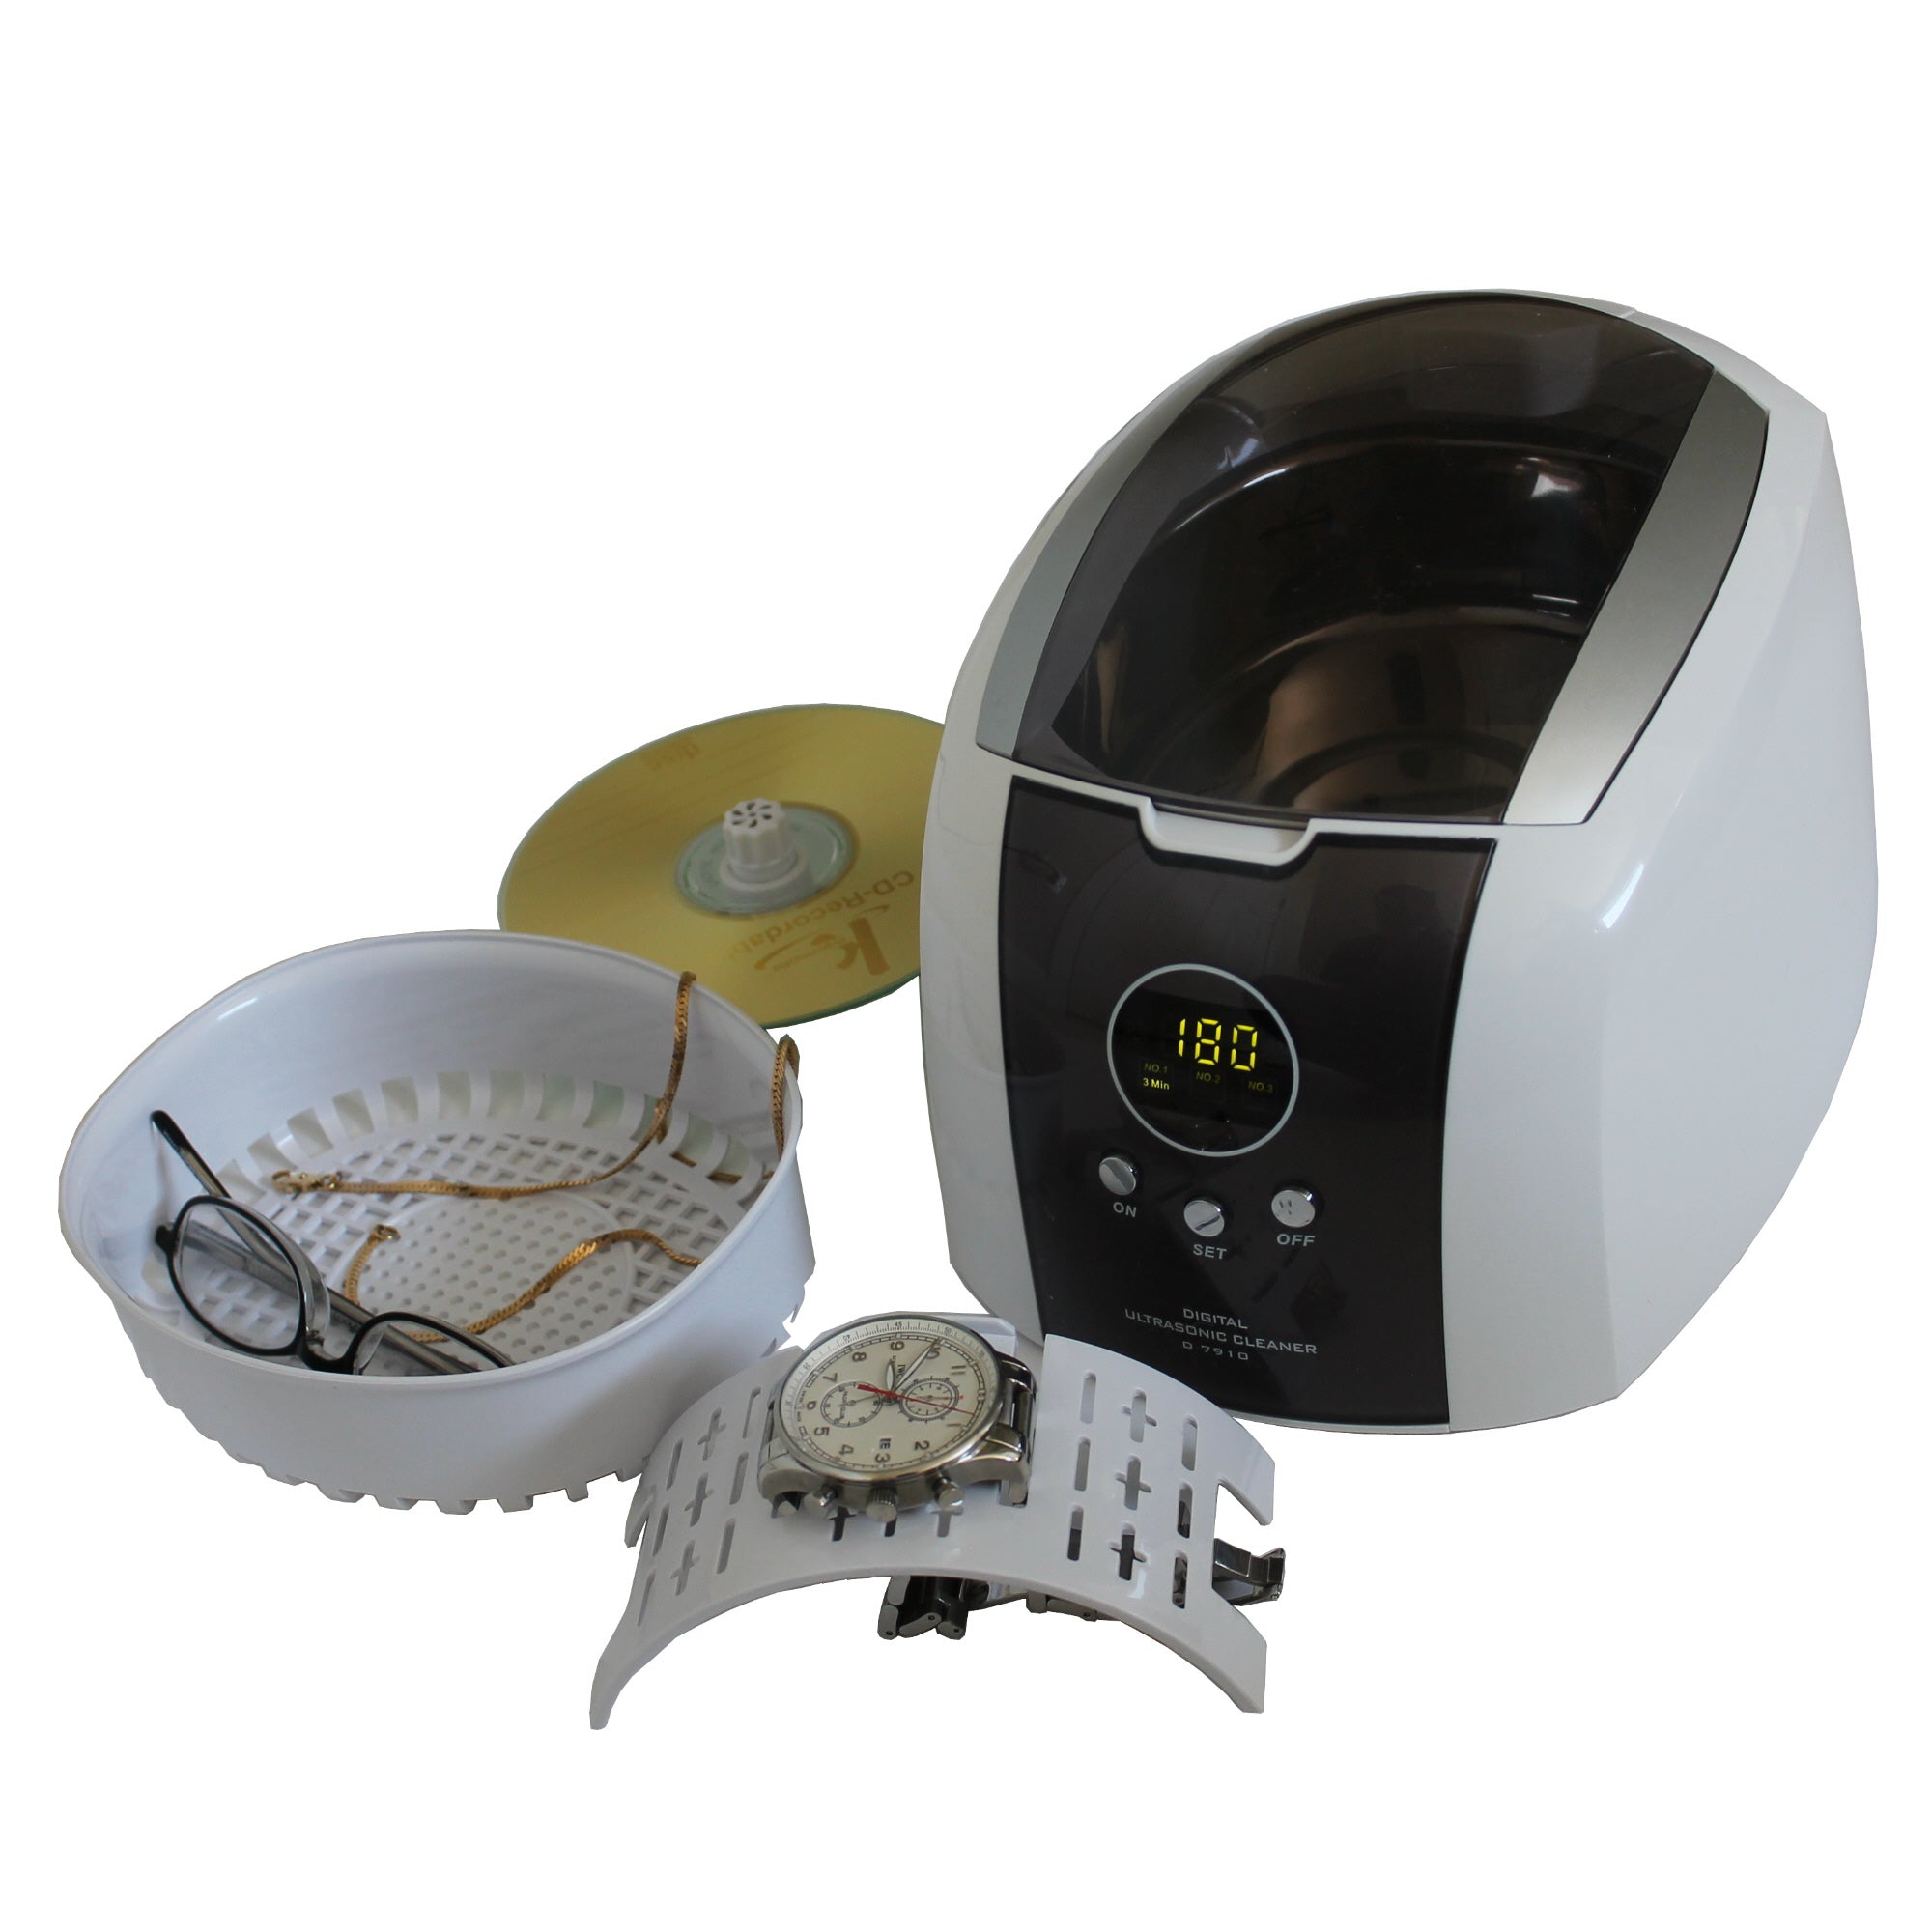 D7910B+CSGJ01 | iSonic? Digital Ultrasonic Cleaner, with Jewelry/Eyewear Cleaning Solution Concentrate CSGJ01, 8OZ, Free Shipping!